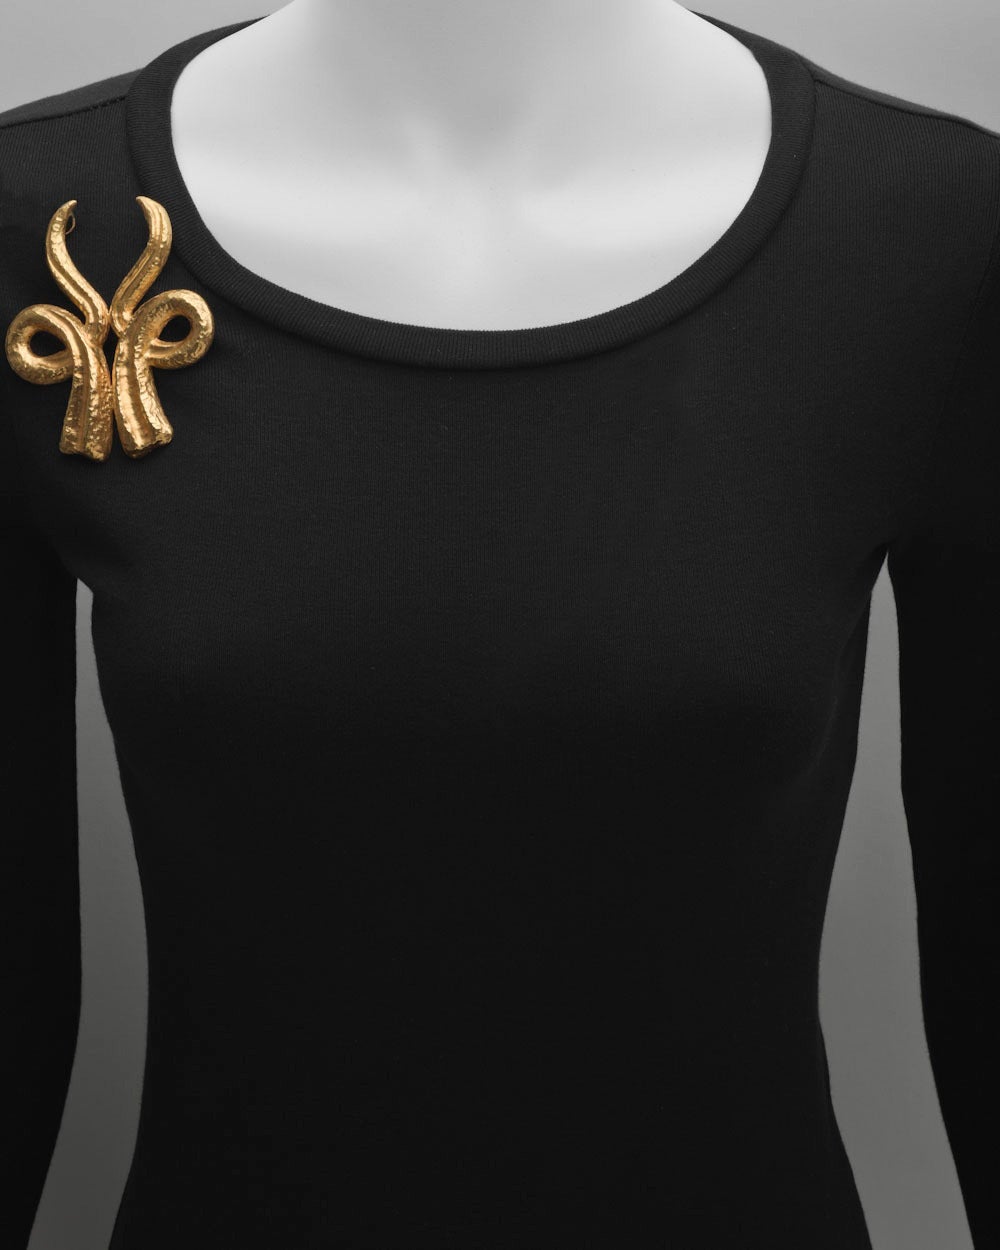 Stylized double horn pendant brooch in hammered 22k yellow gold, made in Greece, with maker's mark for Lalaounis. 3.45